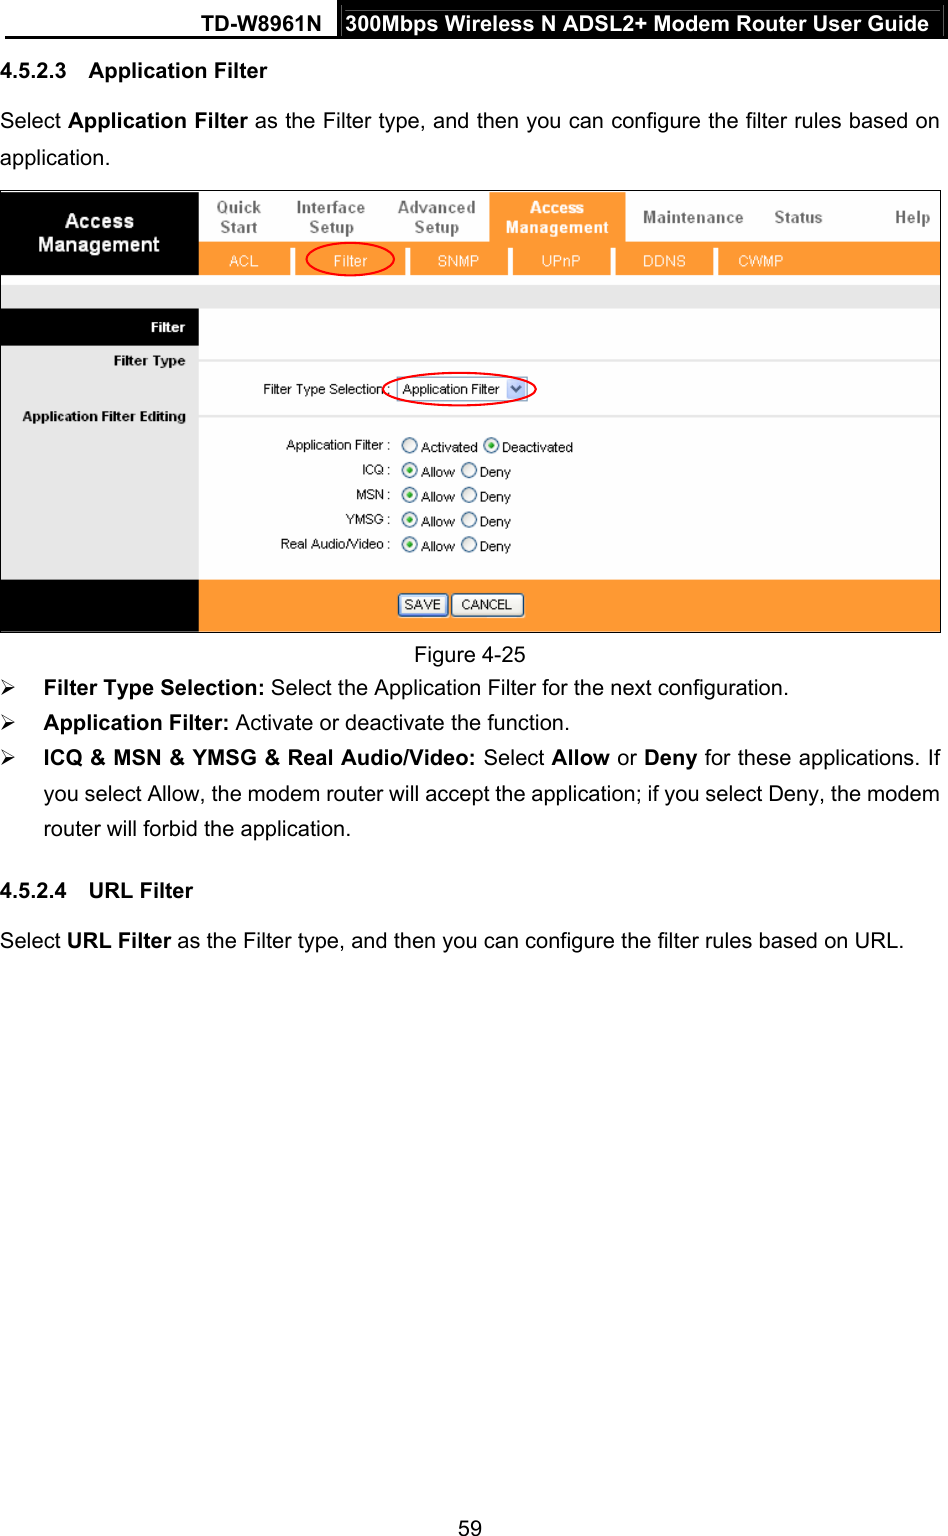 TD-W8961N  300Mbps Wireless N ADSL2+ Modem Router User Guide 59  4.5.2.3  Application Filter Select Application Filter as the Filter type, and then you can configure the filter rules based on application.  Figure 4-25  Filter Type Selection: Select the Application Filter for the next configuration.  Application Filter: Activate or deactivate the function.  ICQ &amp; MSN &amp; YMSG &amp; Real Audio/Video: Select Allow or Deny for these applications. If you select Allow, the modem router will accept the application; if you select Deny, the modem router will forbid the application. 4.5.2.4  URL Filter Select URL Filter as the Filter type, and then you can configure the filter rules based on URL. 